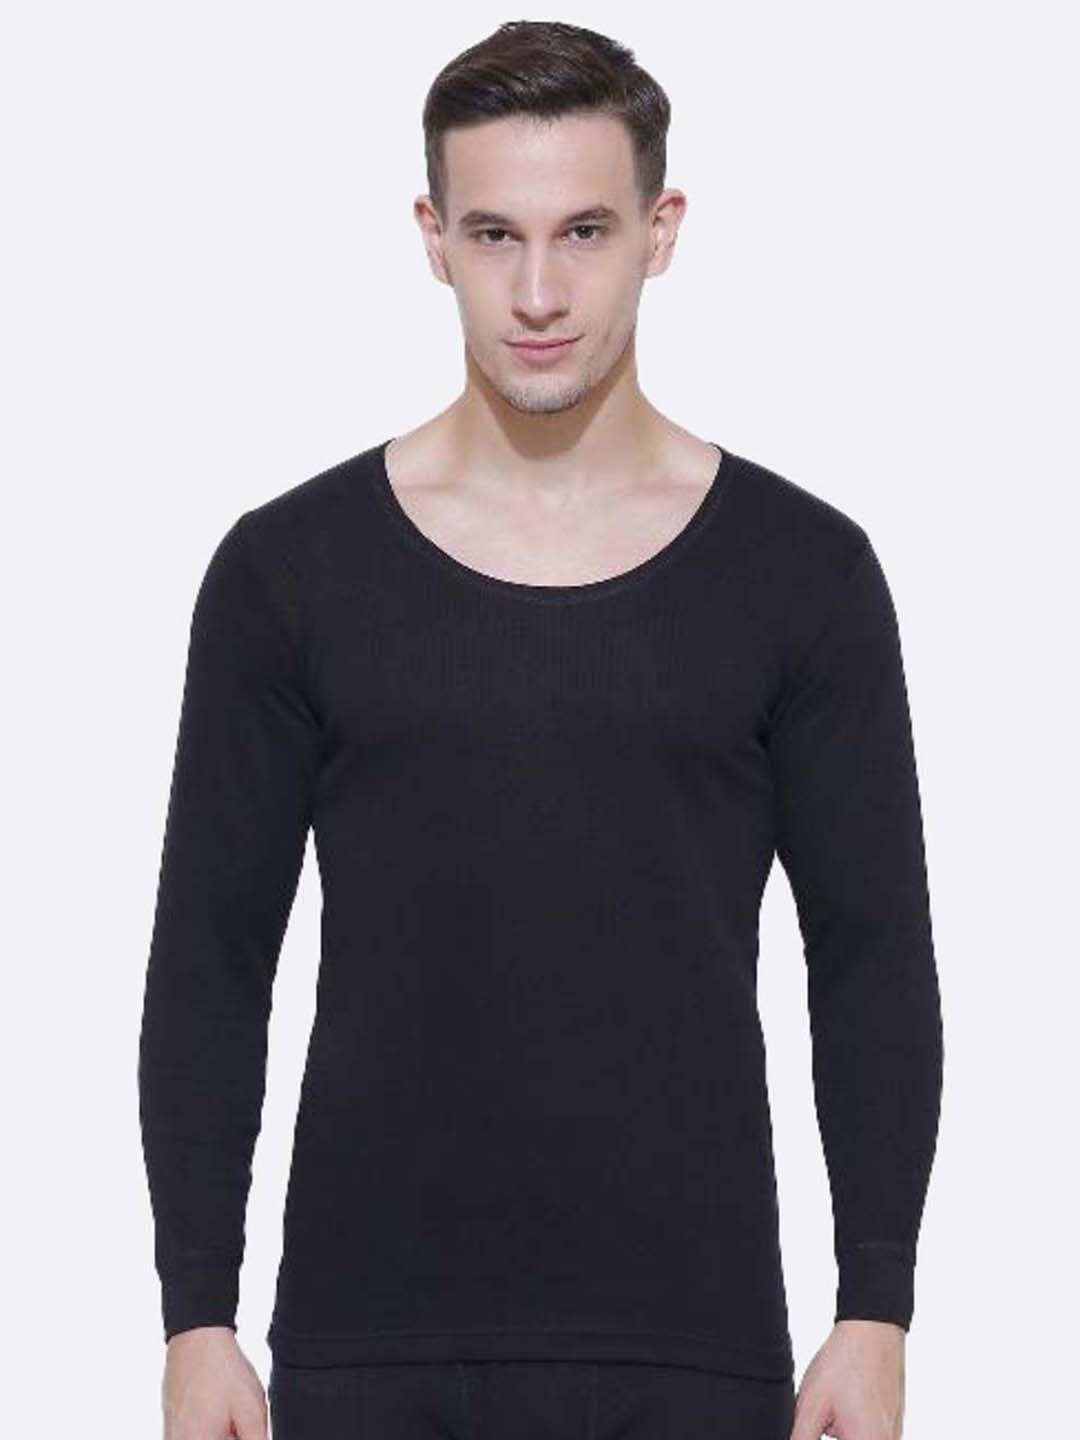 bodycare insider men striped cotton anti-bacterial thermal tops